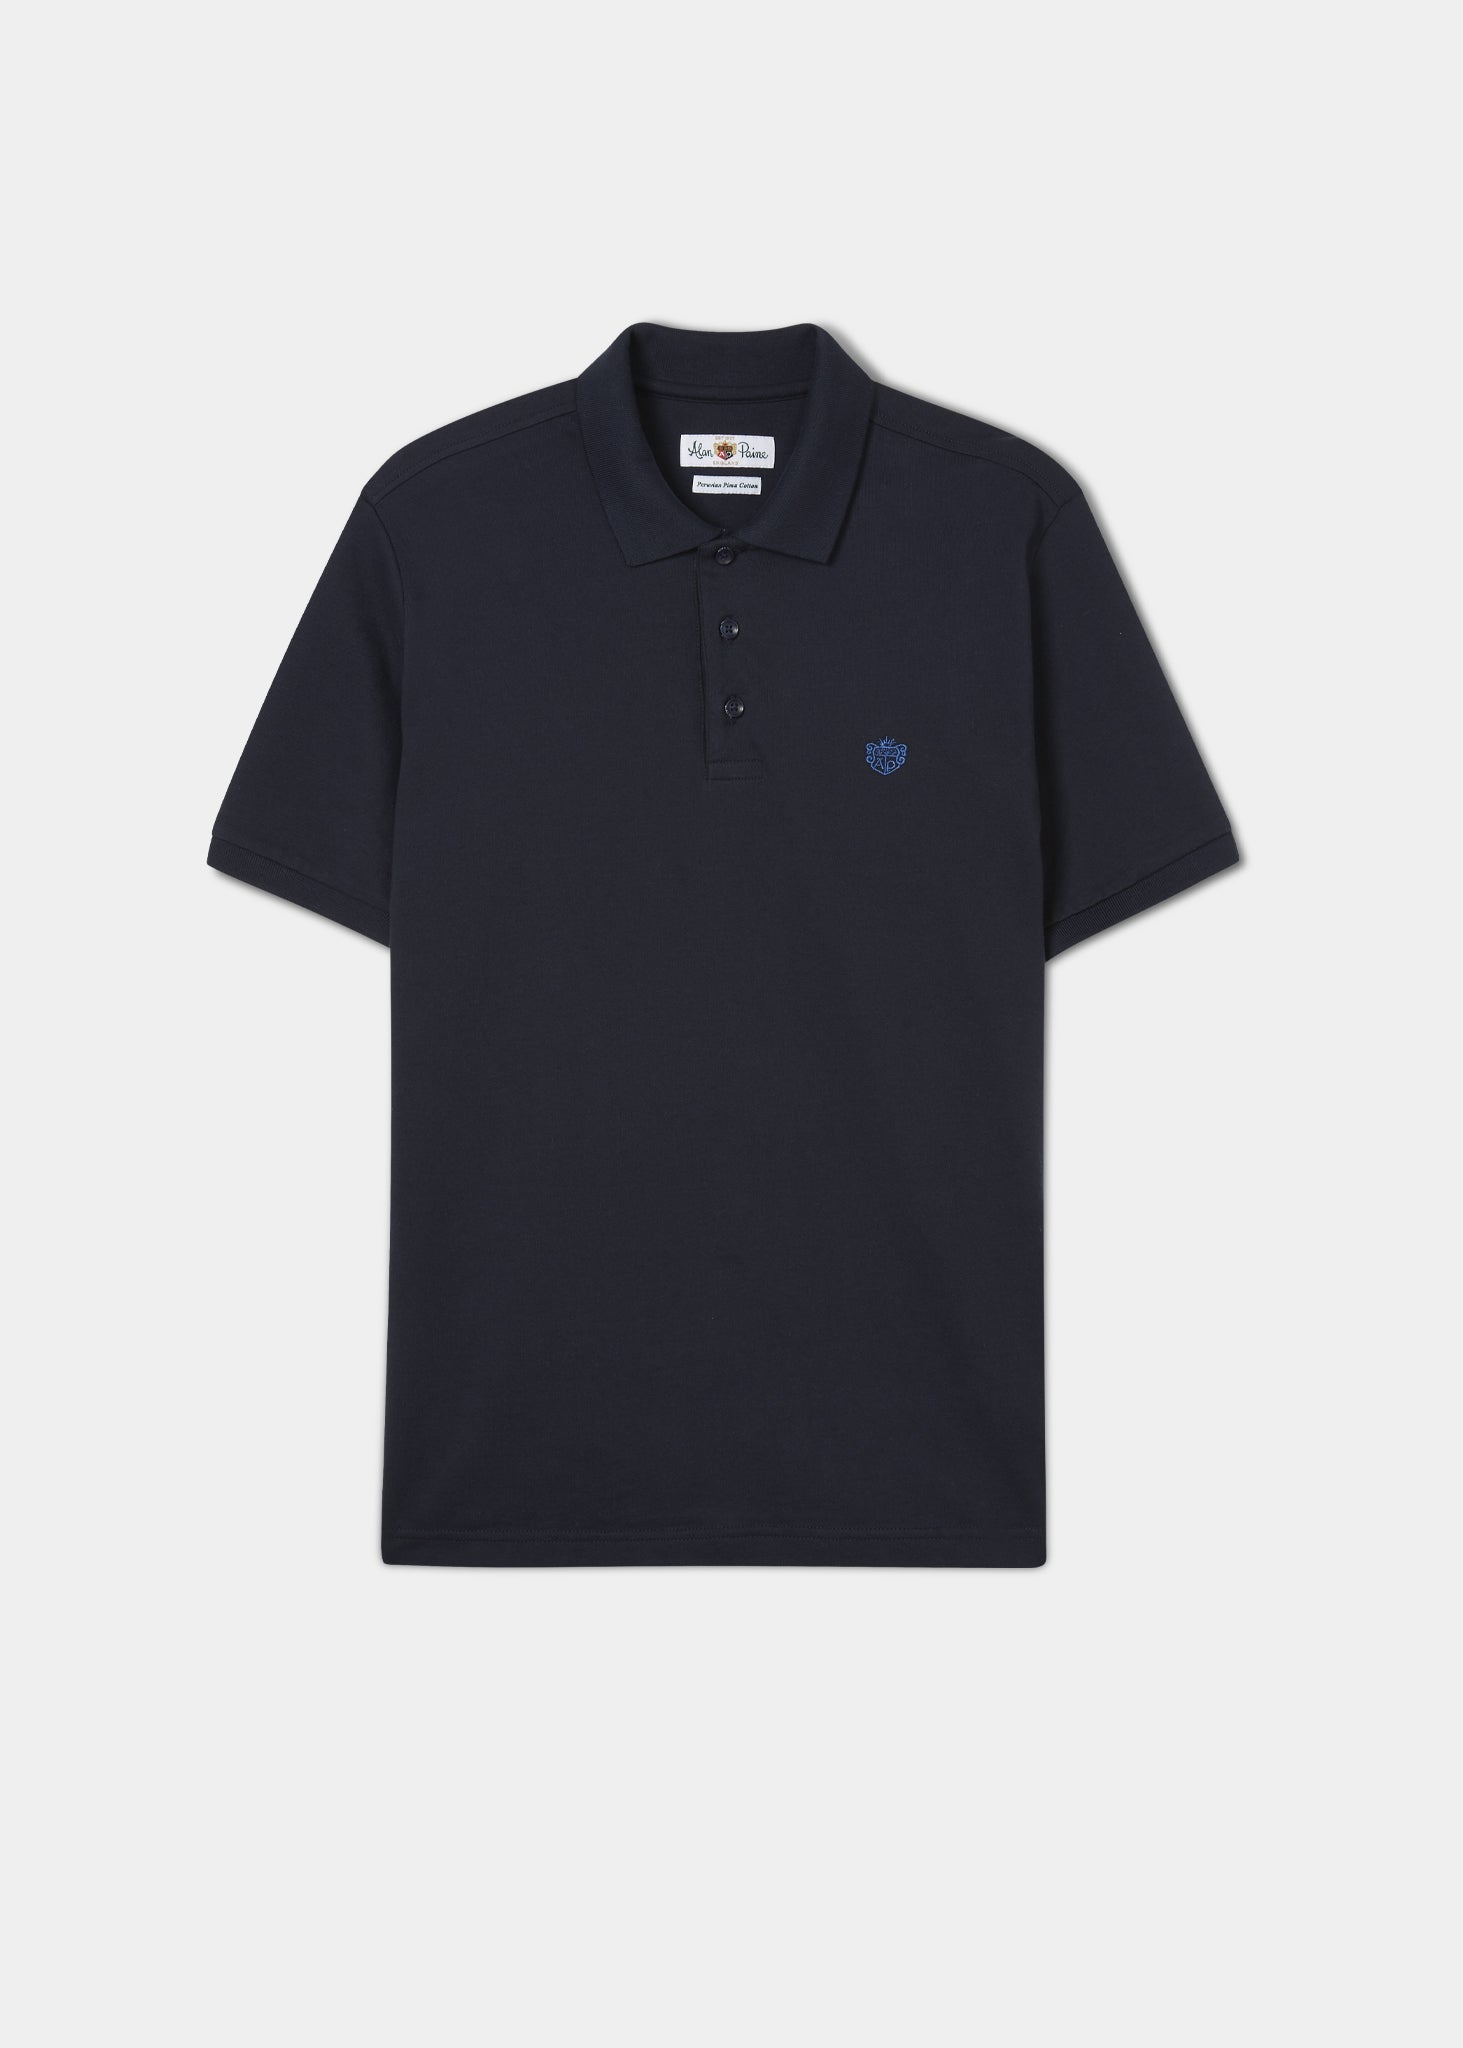 Pima cotton polo shirt in navy with AP emblem.